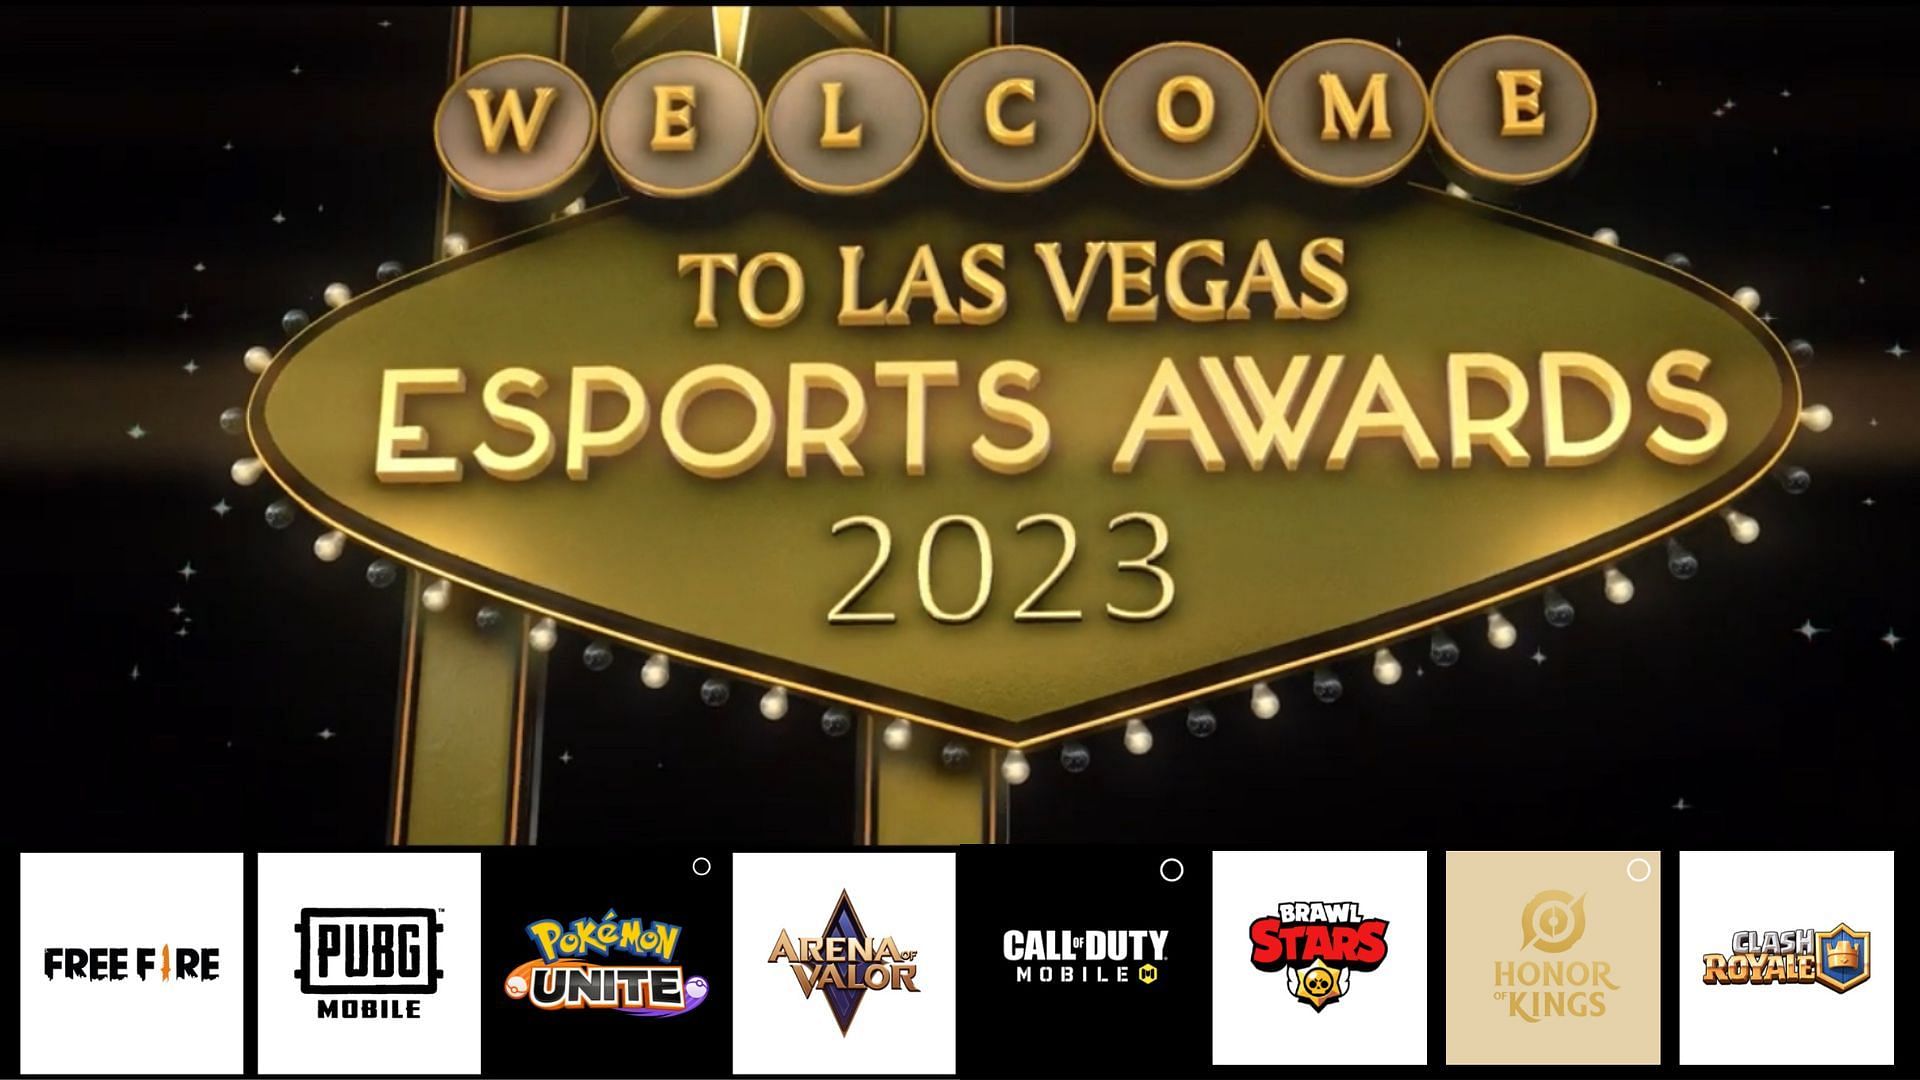 Esports Awards reveals the nominees for 2023 Esports Mobile Game of the Year (Image via Sportskeeda)